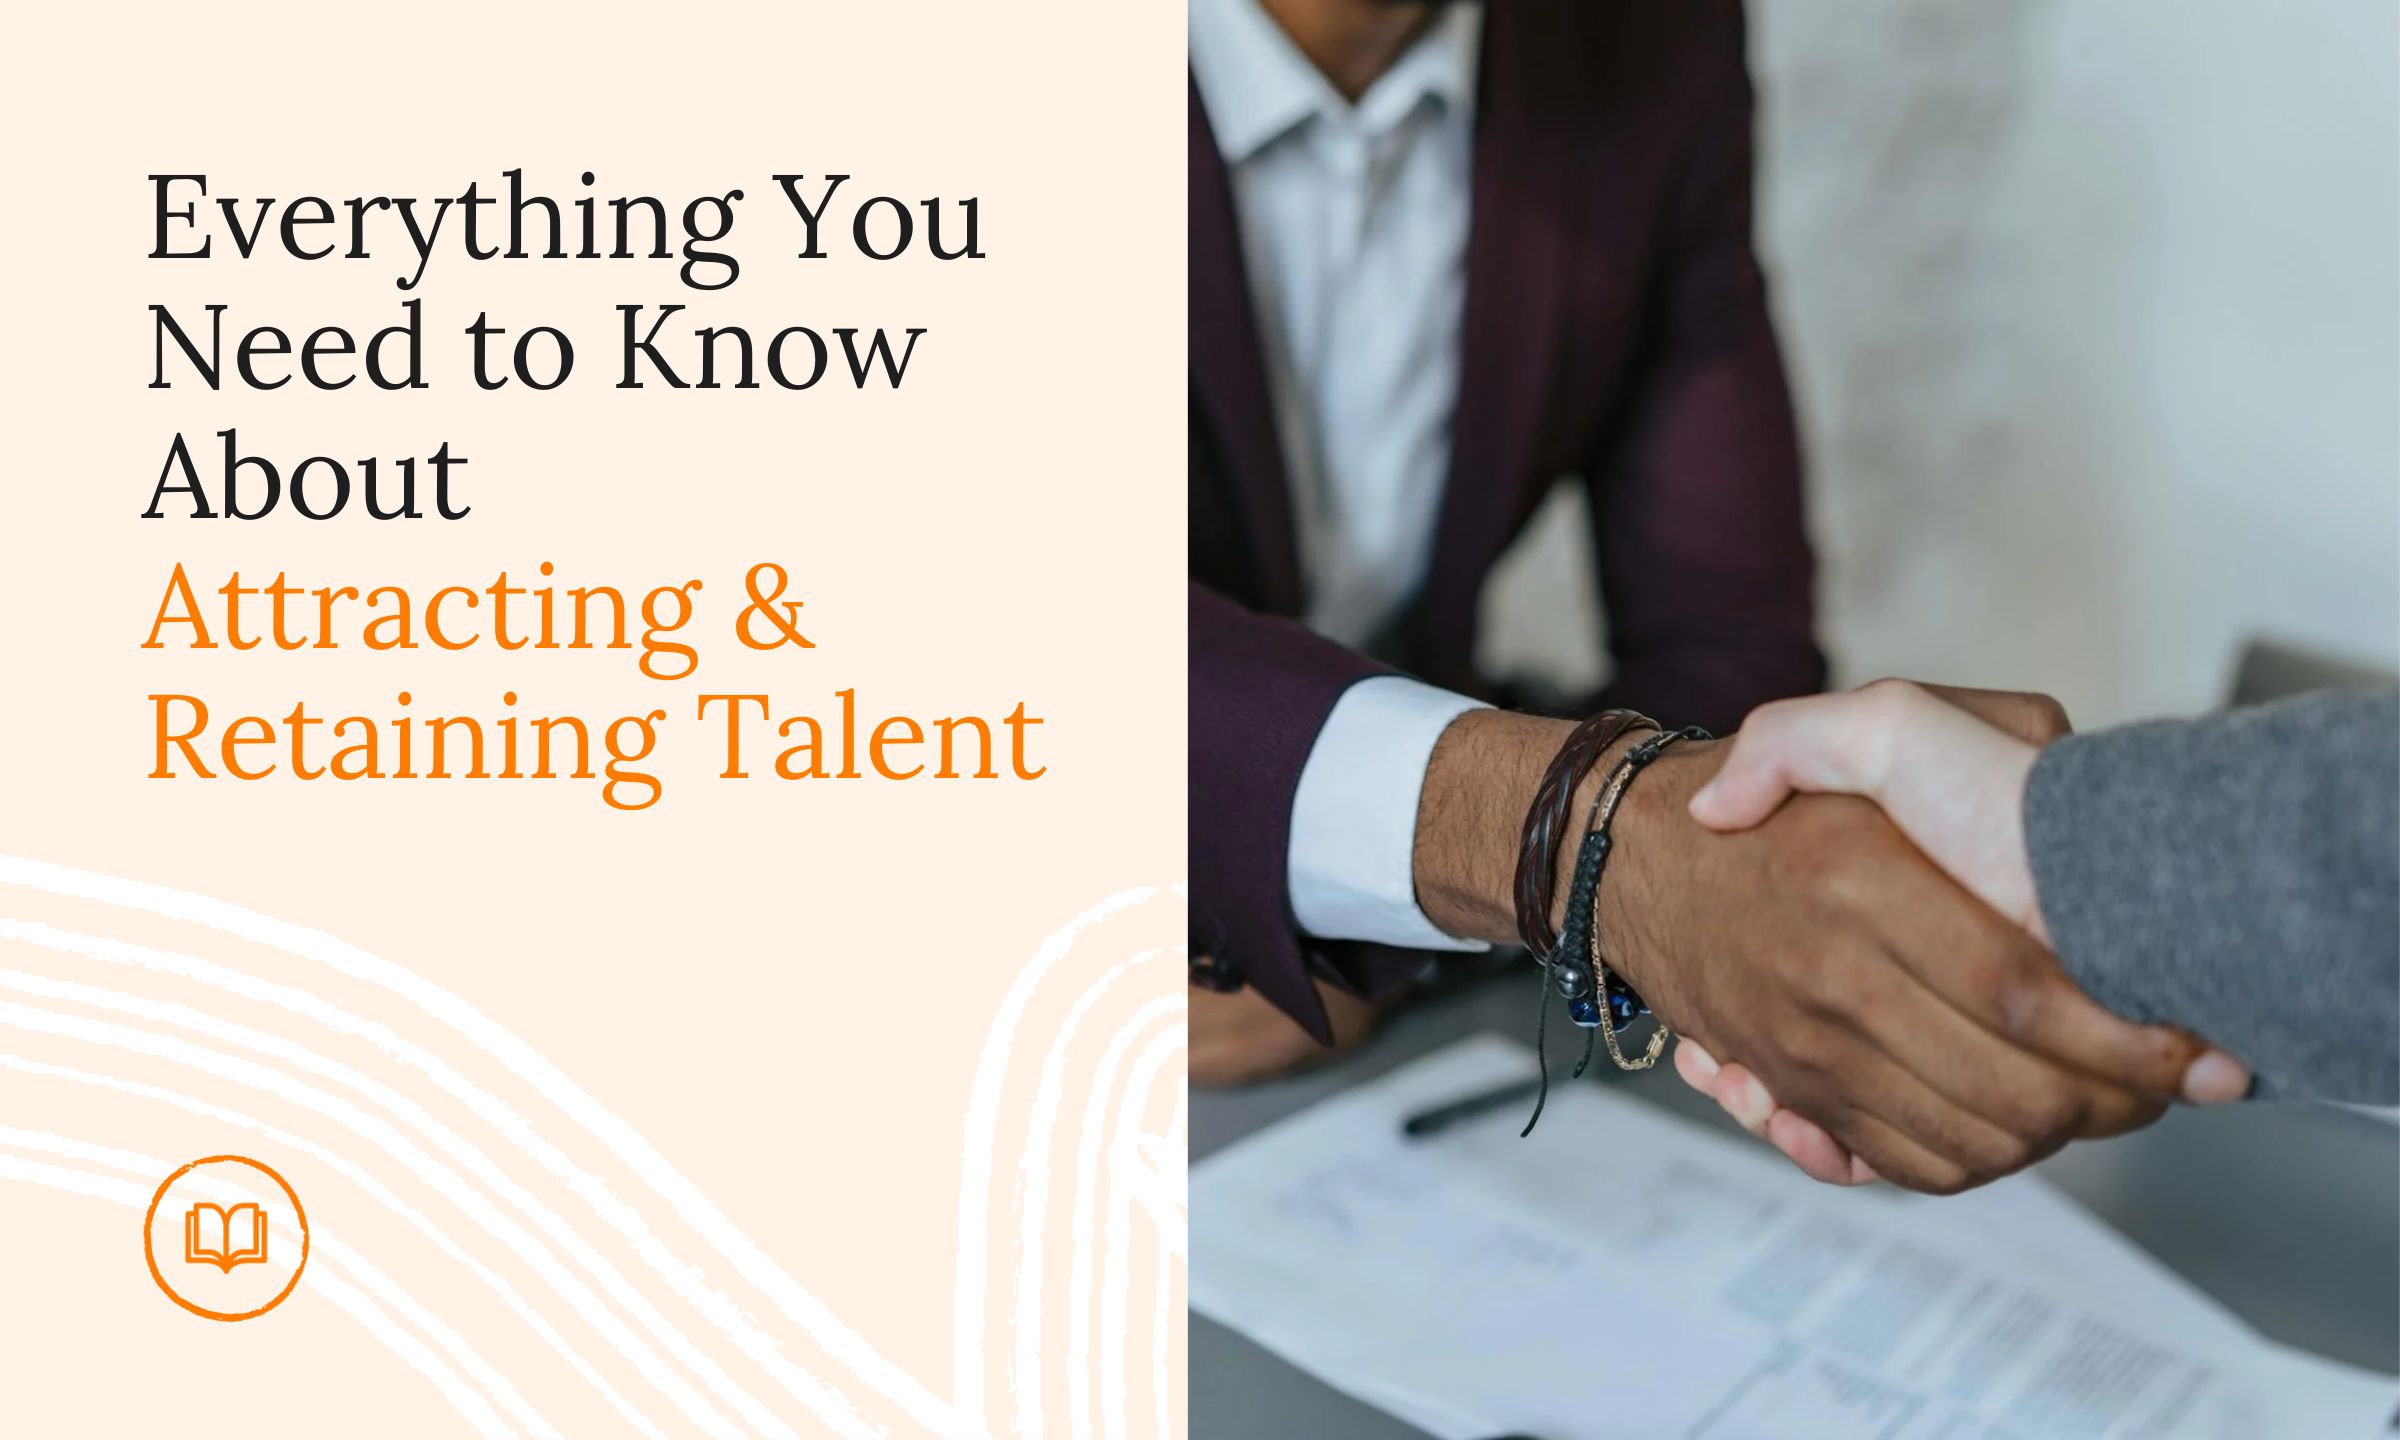 Everything You Need to Know About Attracting & Retaining Talent